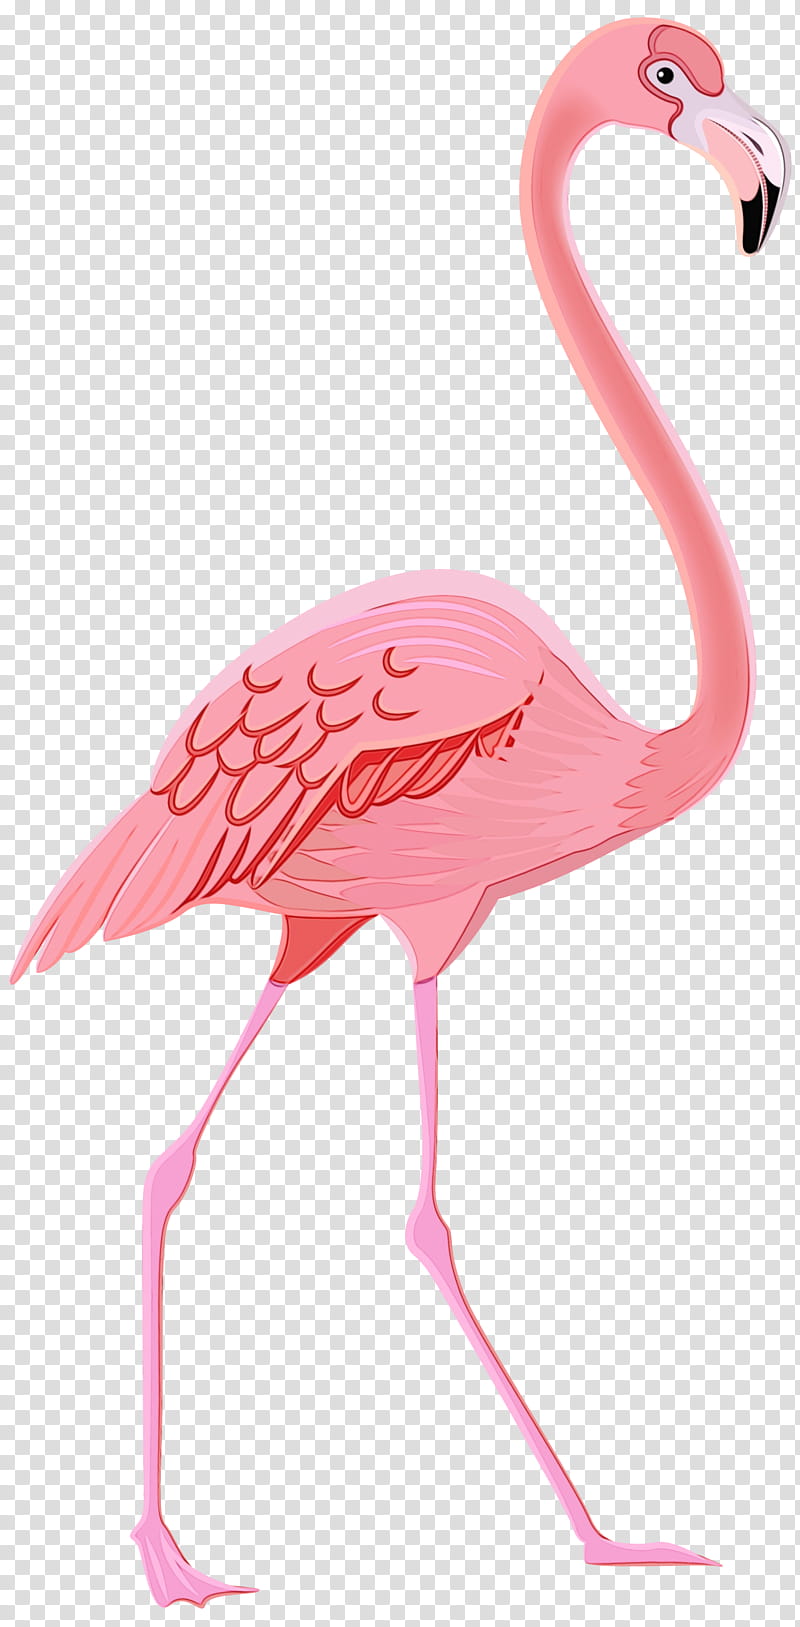 Flamingo Watercolor, Greater Flamingo, Drawing, Plastic Flamingo, Watercolor Painting, Interior Design Services, Swimming Pools, Phoenicopterus transparent background PNG clipart